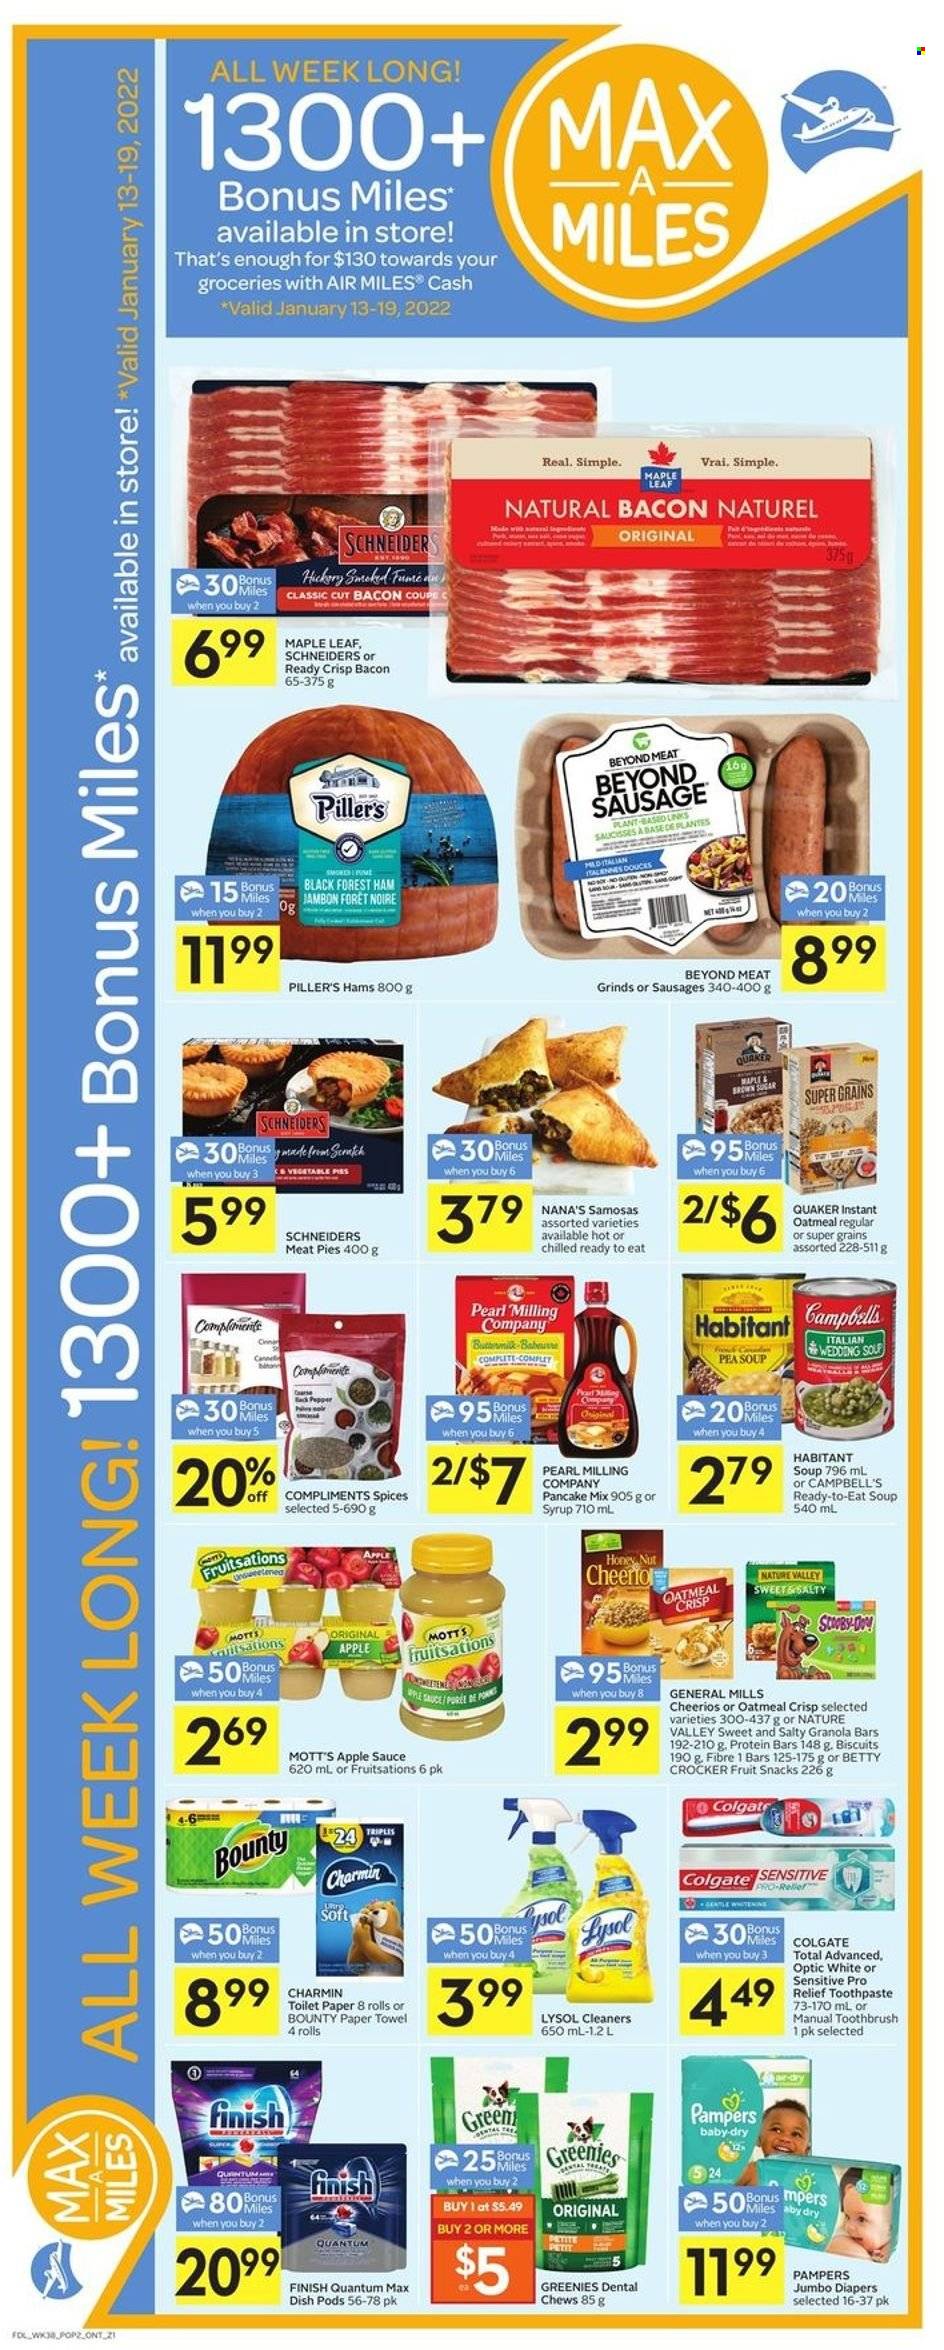 thumbnail - Foodland Flyer - January 13, 2022 - January 19, 2022 - Sales products - Mott's, Campbell's, soup, sauce, pancakes, Quaker, bacon, ham, sausage, Bounty, chewing gum, biscuit, fruit snack, sugar, oatmeal, Cheerios, protein bar, granola bar, Nature Valley, apple sauce, Ron Pelicano, Colgate, Pampers. Page 4.